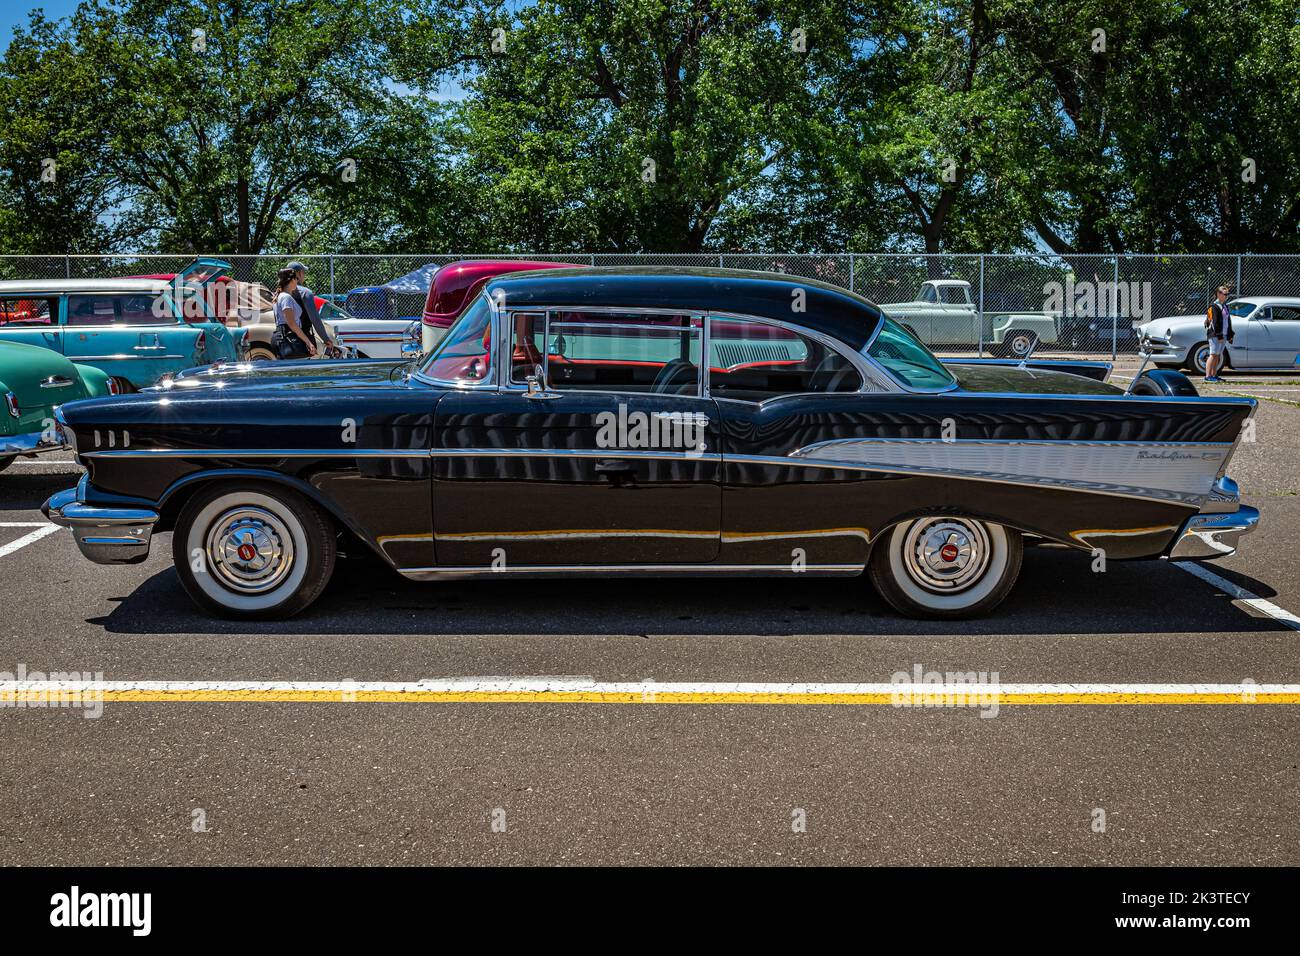 Falcon Heights, MN - June 18, 2022: High perspective side view of a 1957 Chevrolet BelAir 2 Door Hardtop at a local car show. Stock Photo